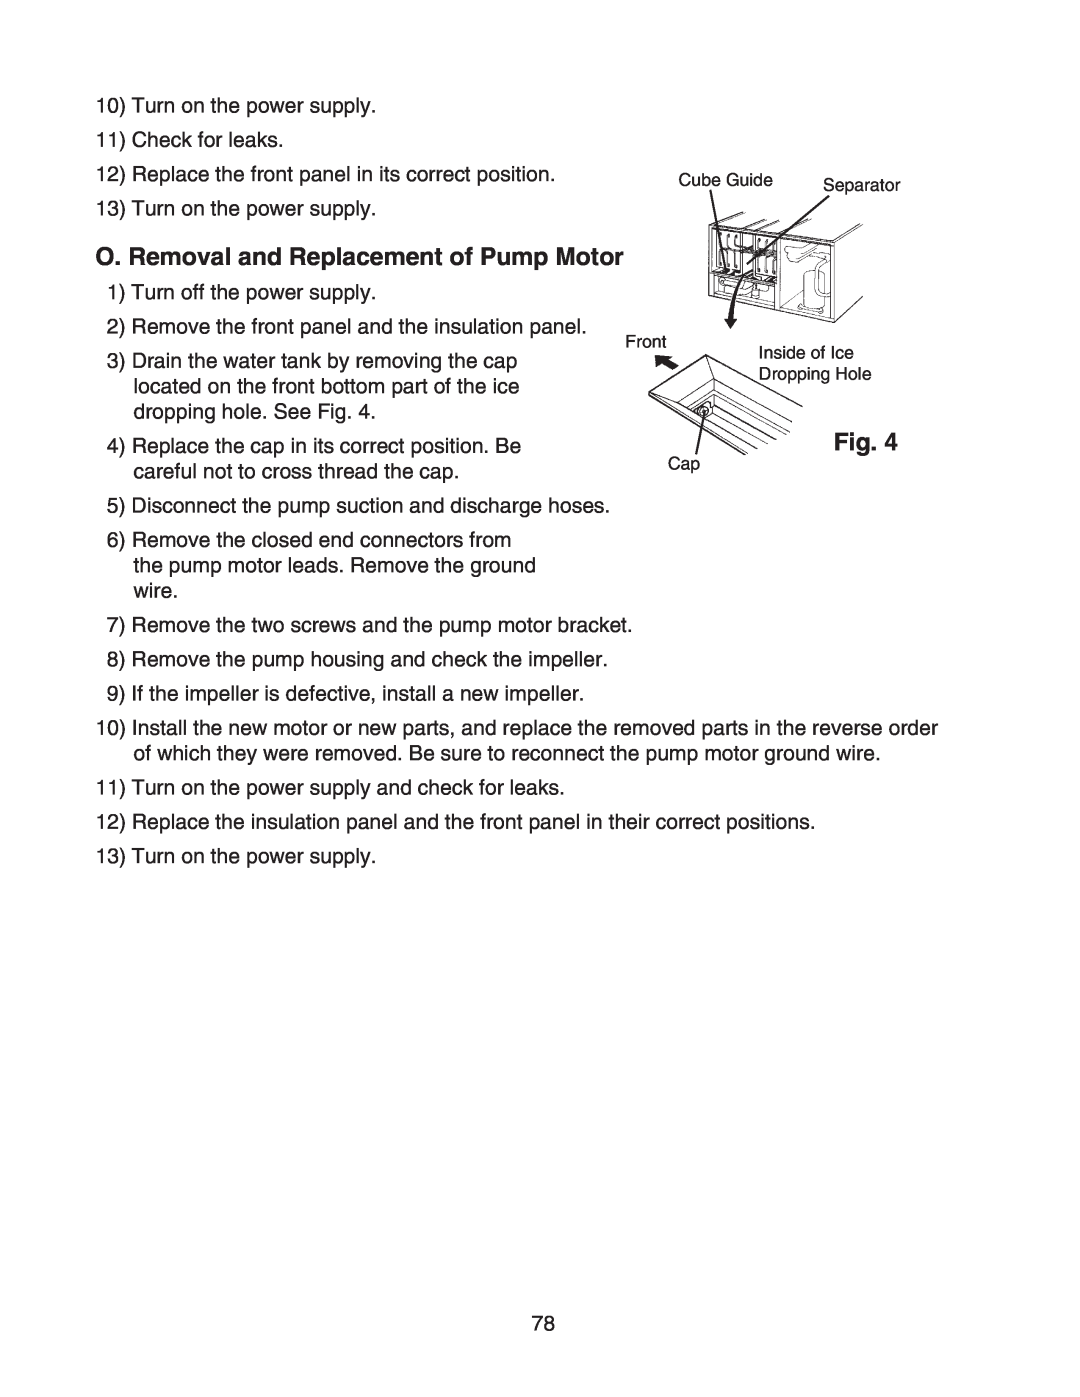 Hoshizaki KM-1301SAH/3, KM-1301SRH/3, KM-1301SWH/3 service manual O. Removal and Replacement of Pump Motor, Fig 